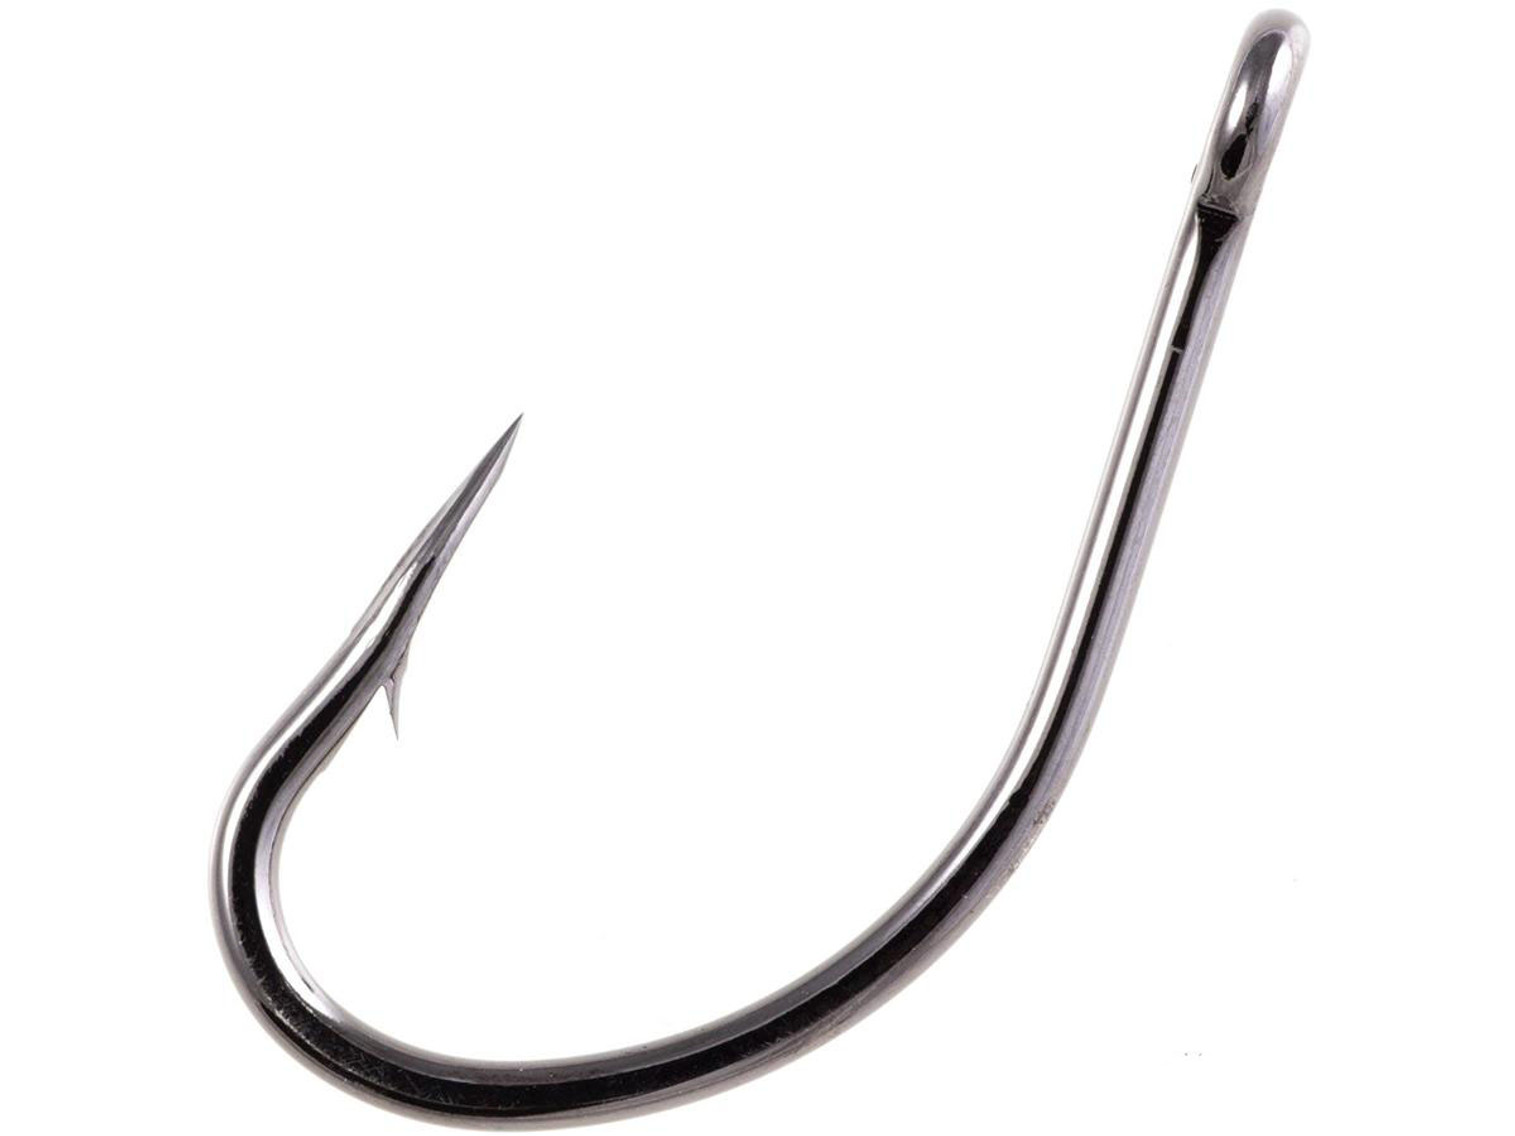 Owner 5306-111 Flyliner Pro Pack Live Bait Hook with Forged Short Shank Cutting Point (Size: 1/0 - 41 Per Pack)